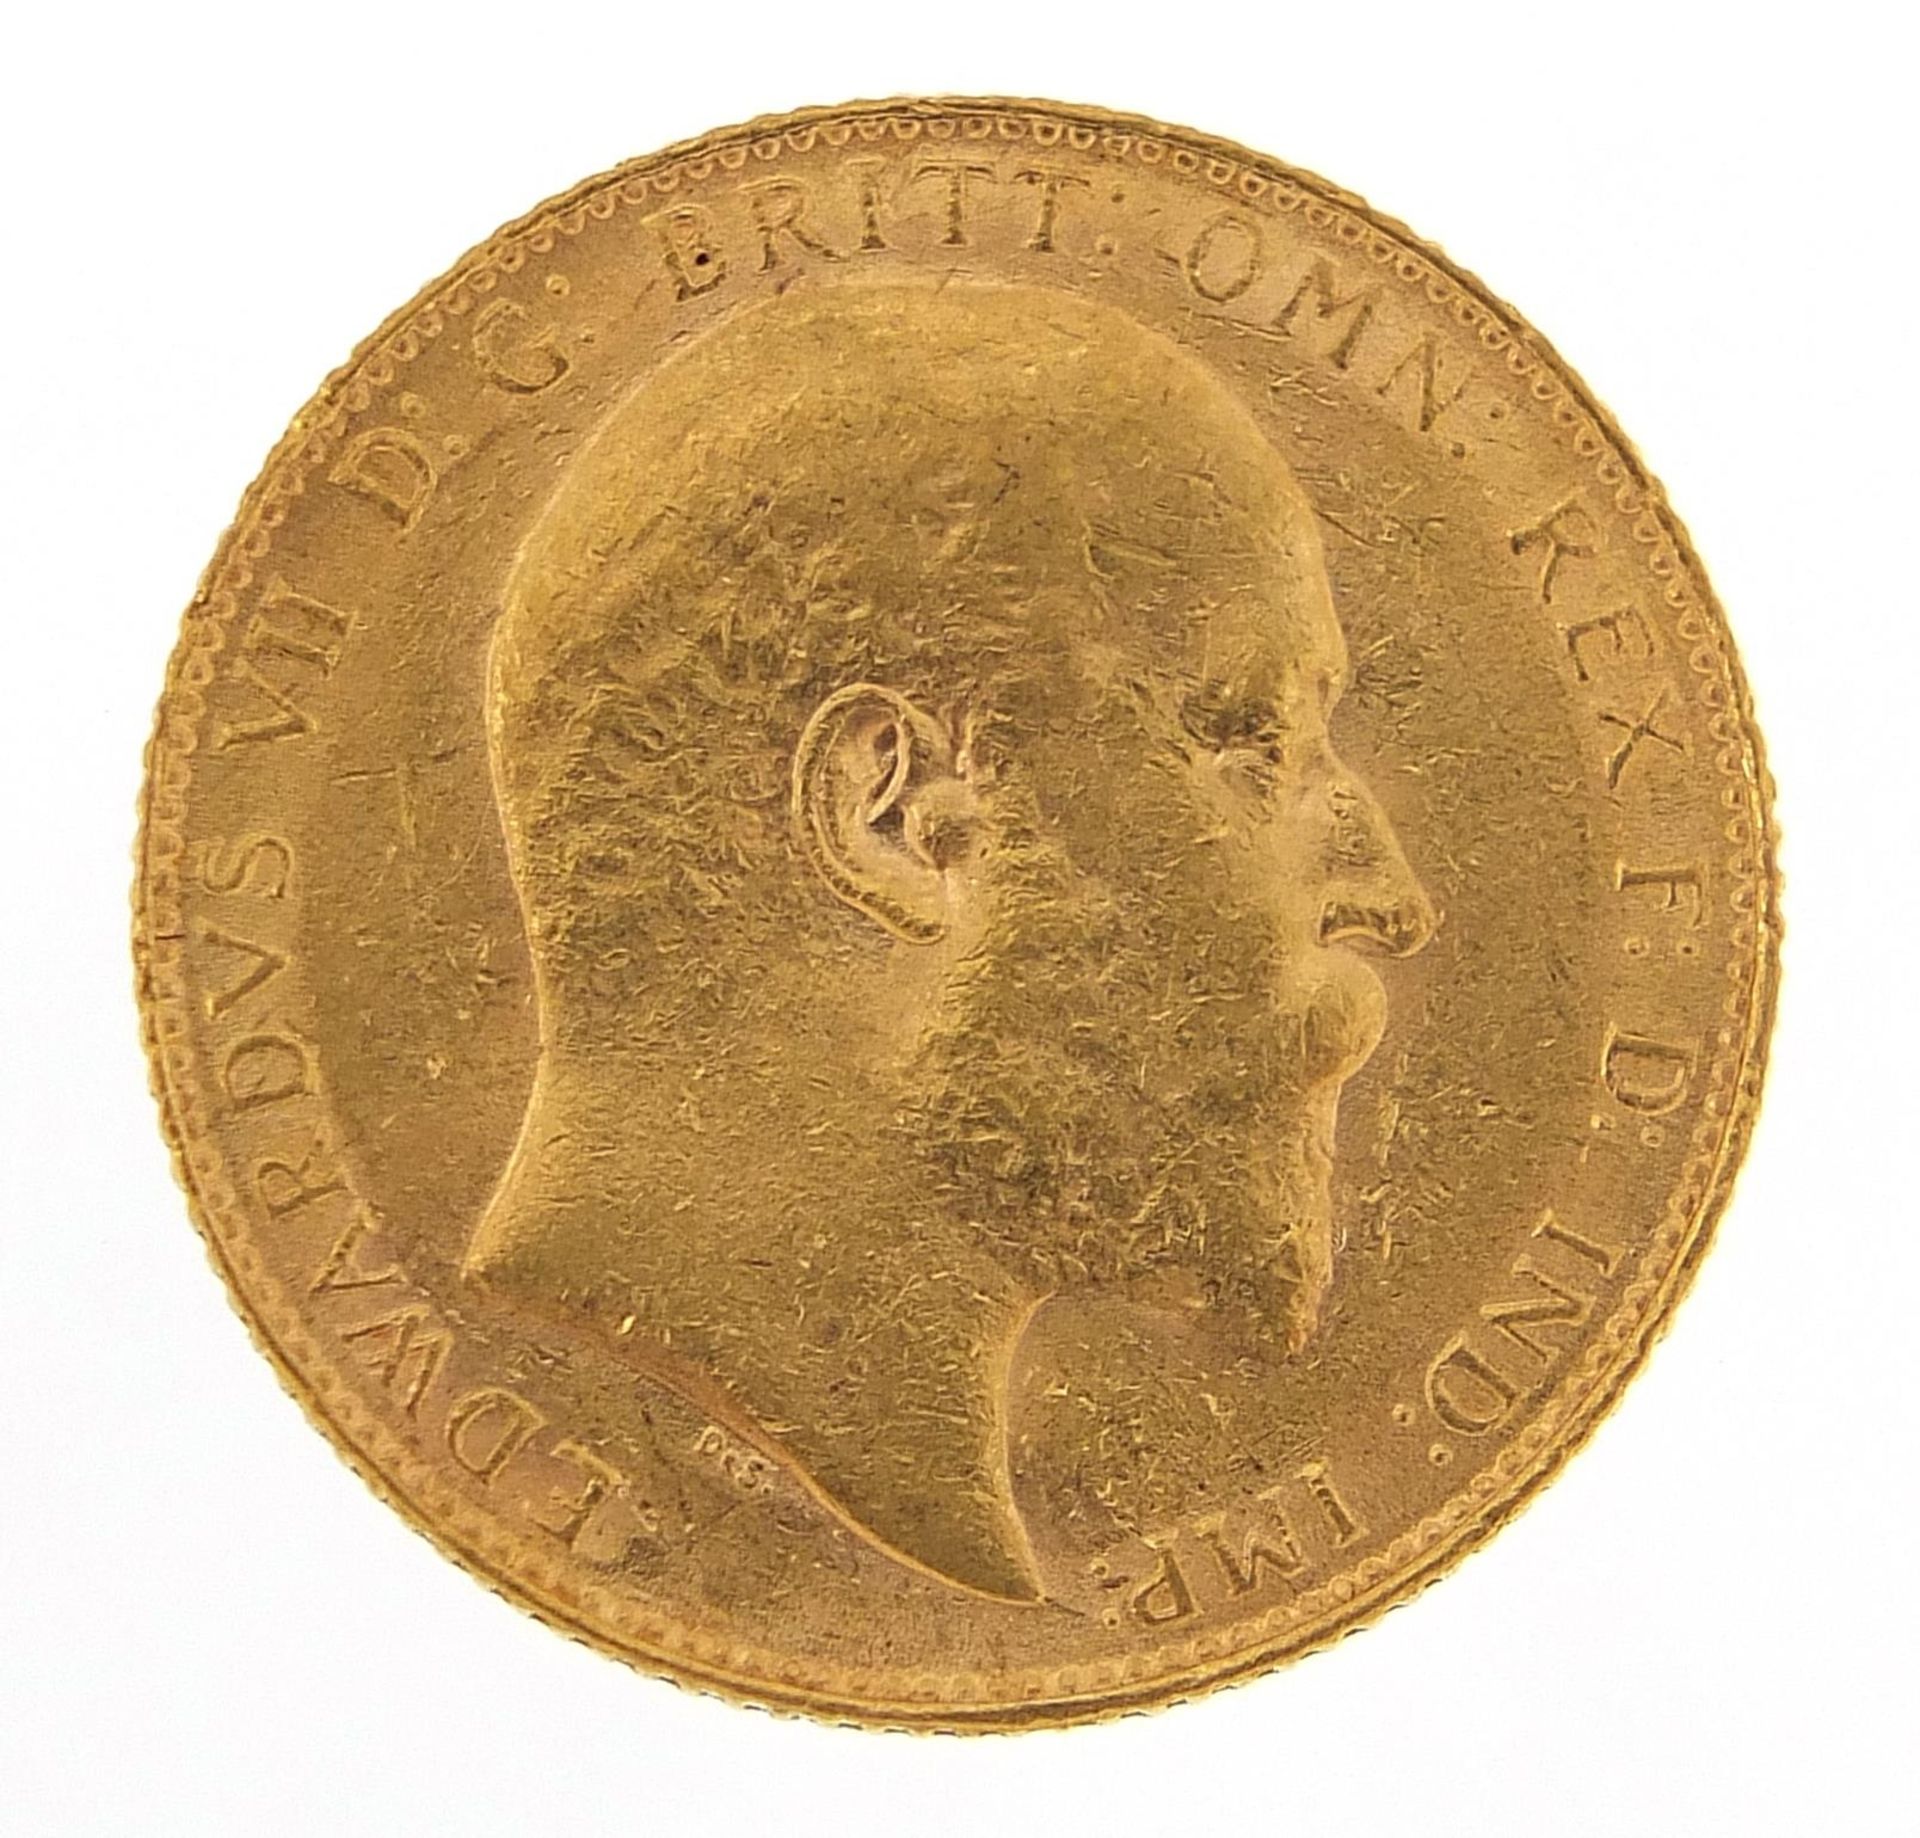 Edward VII 1908 gold sovereign - this lot is sold without buyer's premium - Image 2 of 3